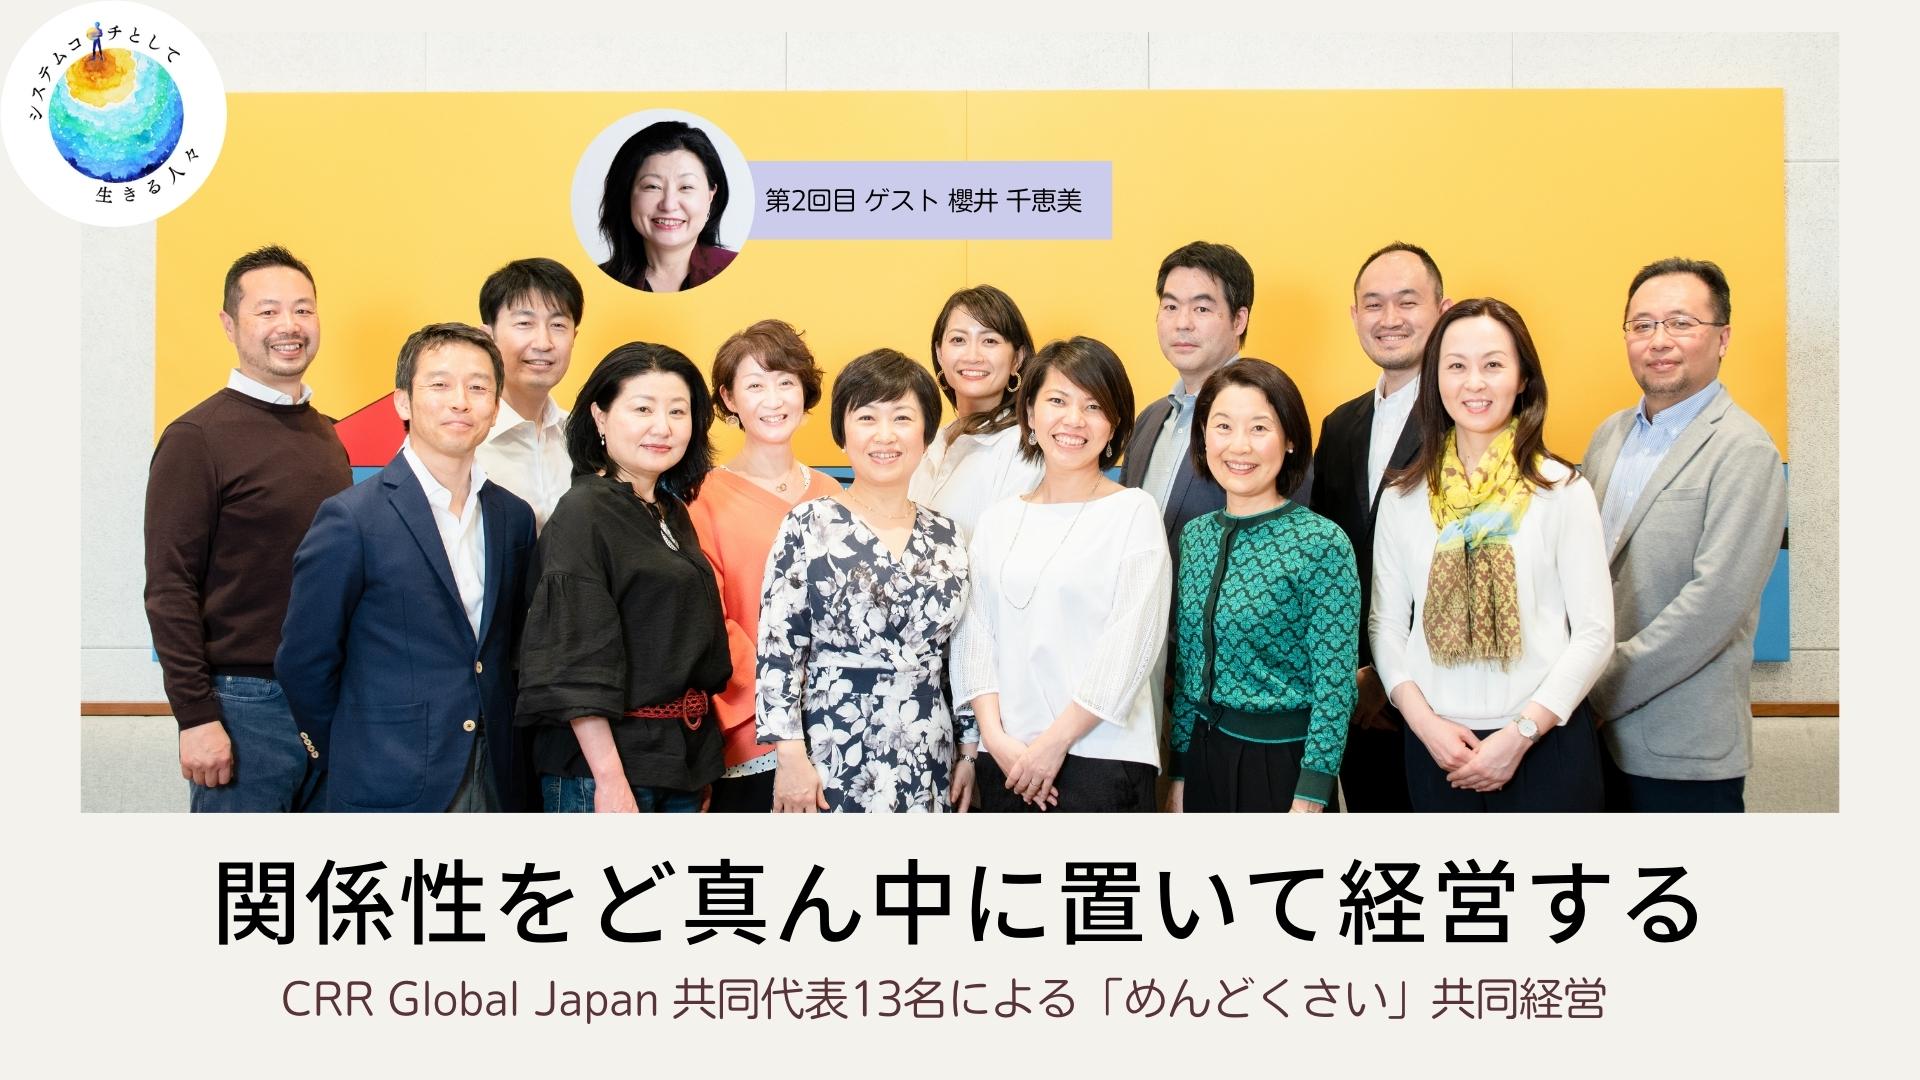 the title of this article and members of CRR Global Japan